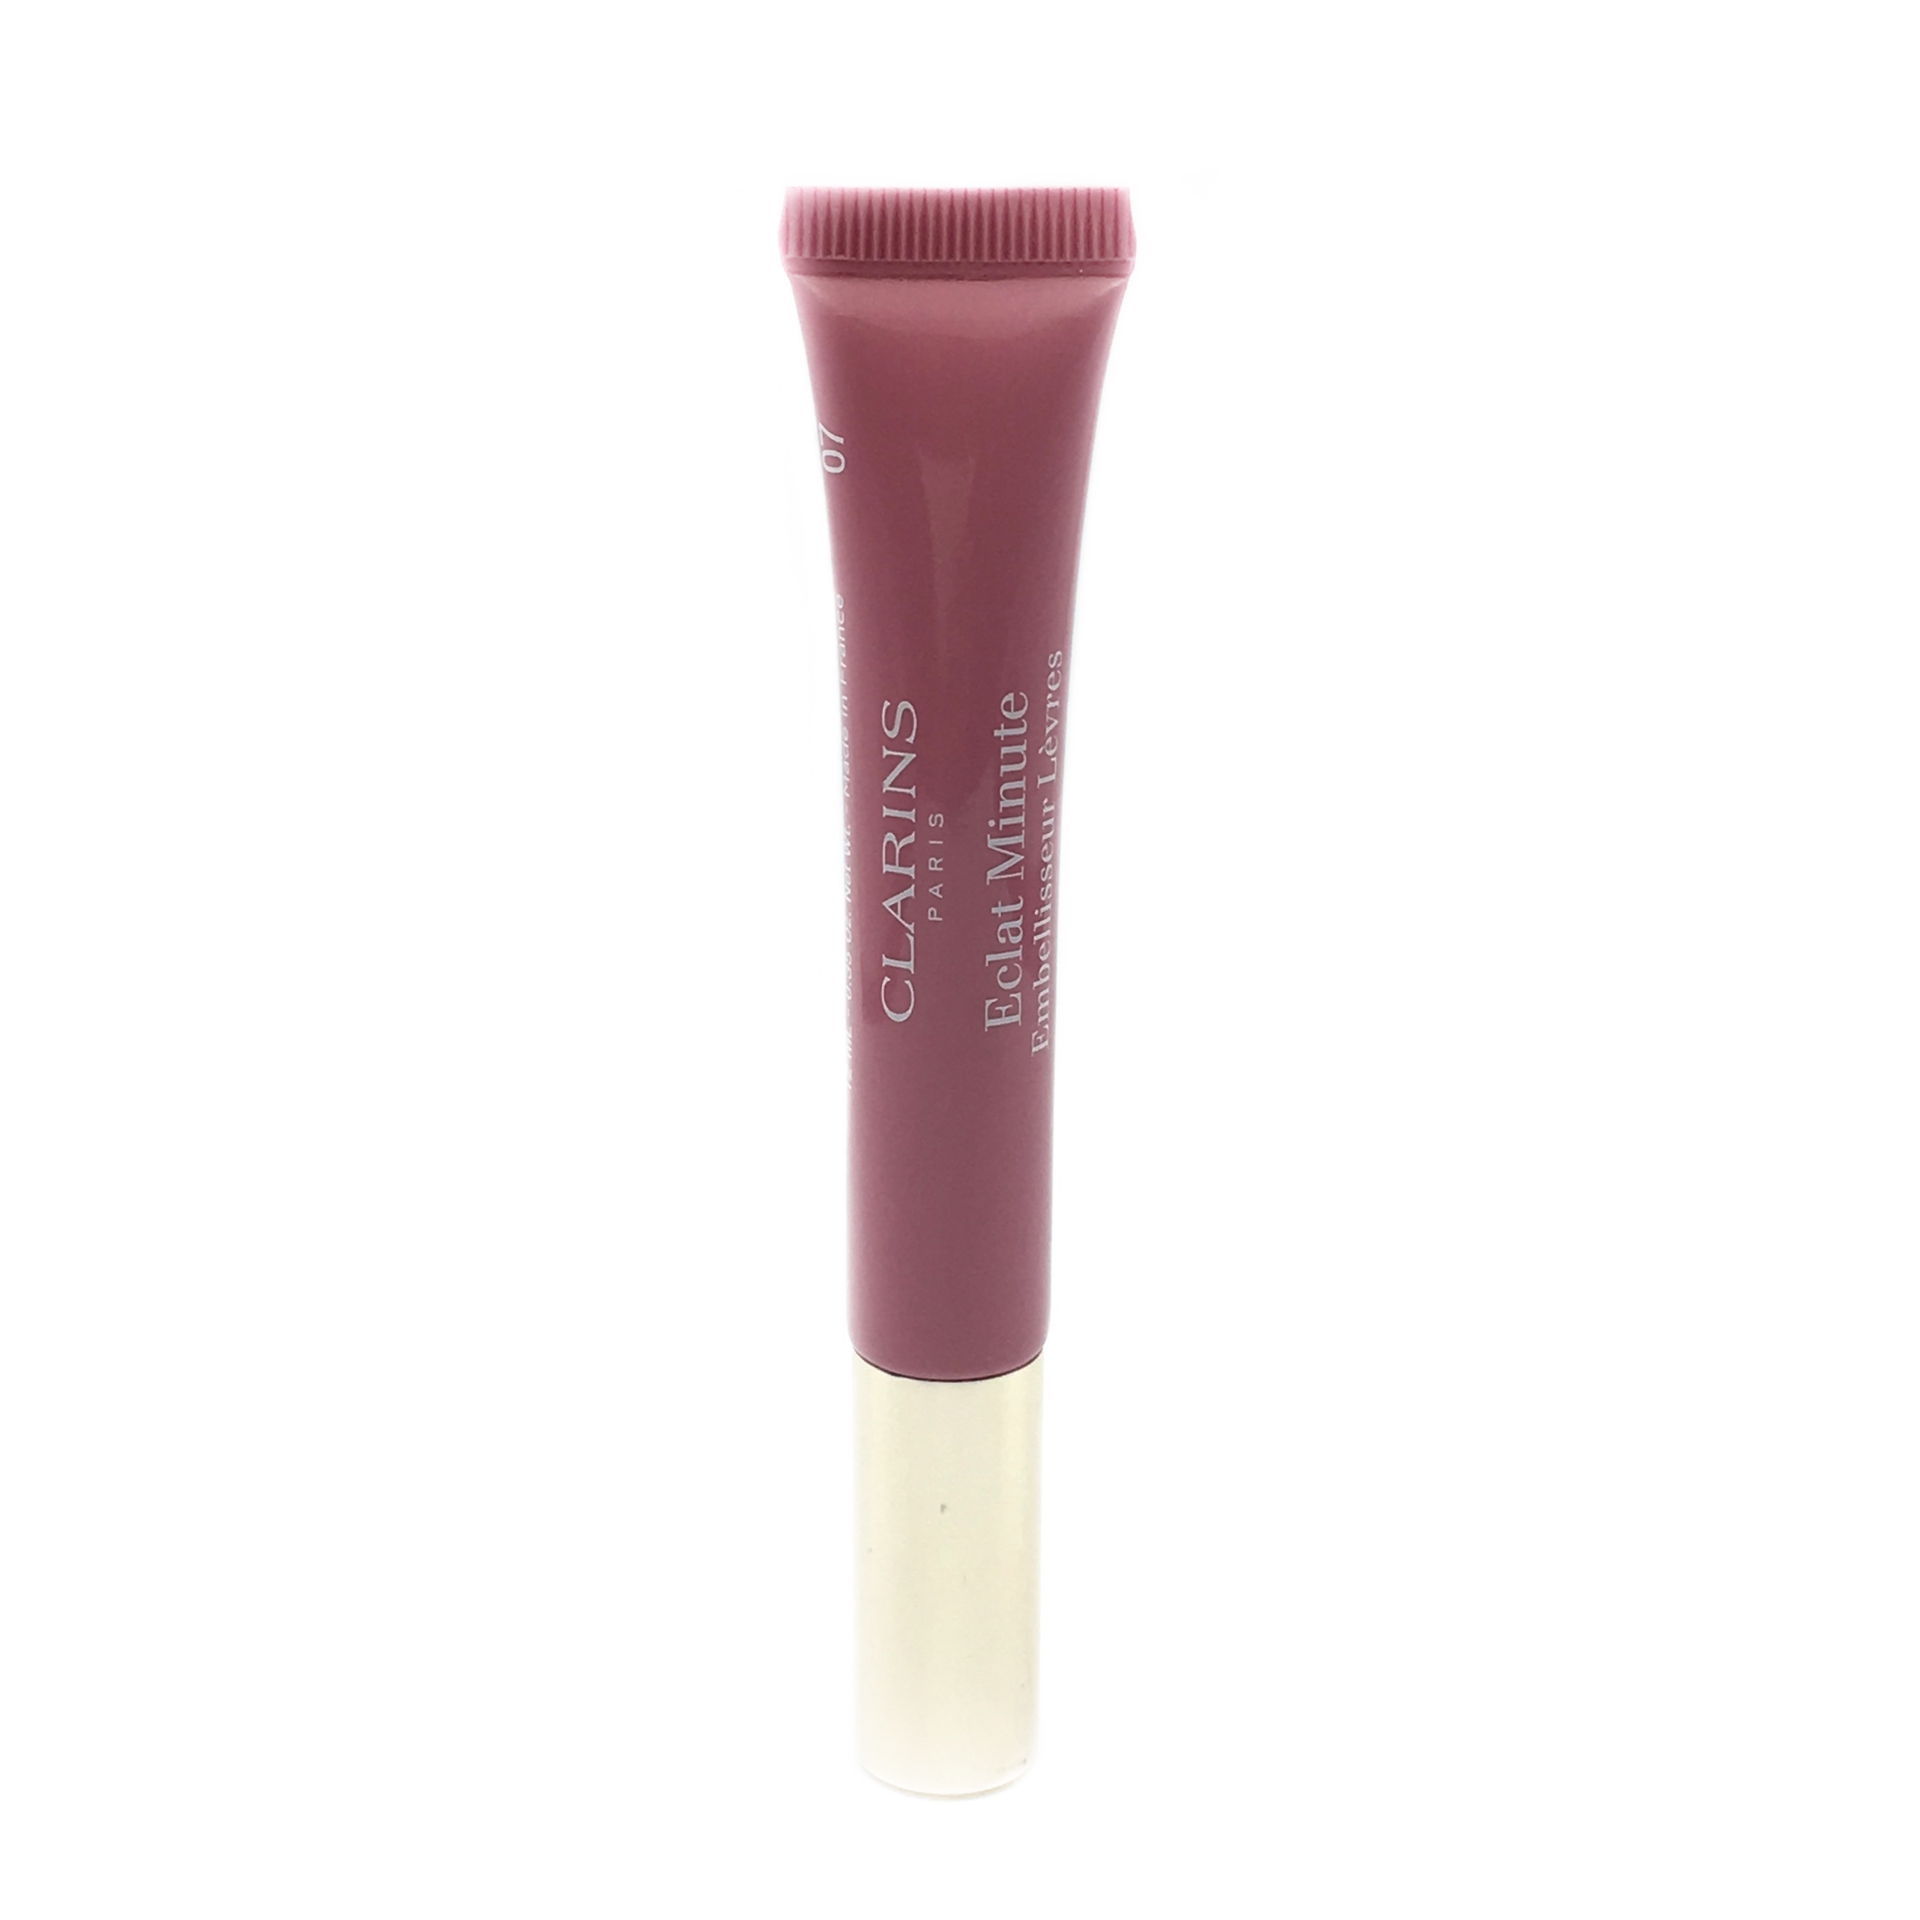 Clarins Instant Light Natural Lip Perfector 07 Lips